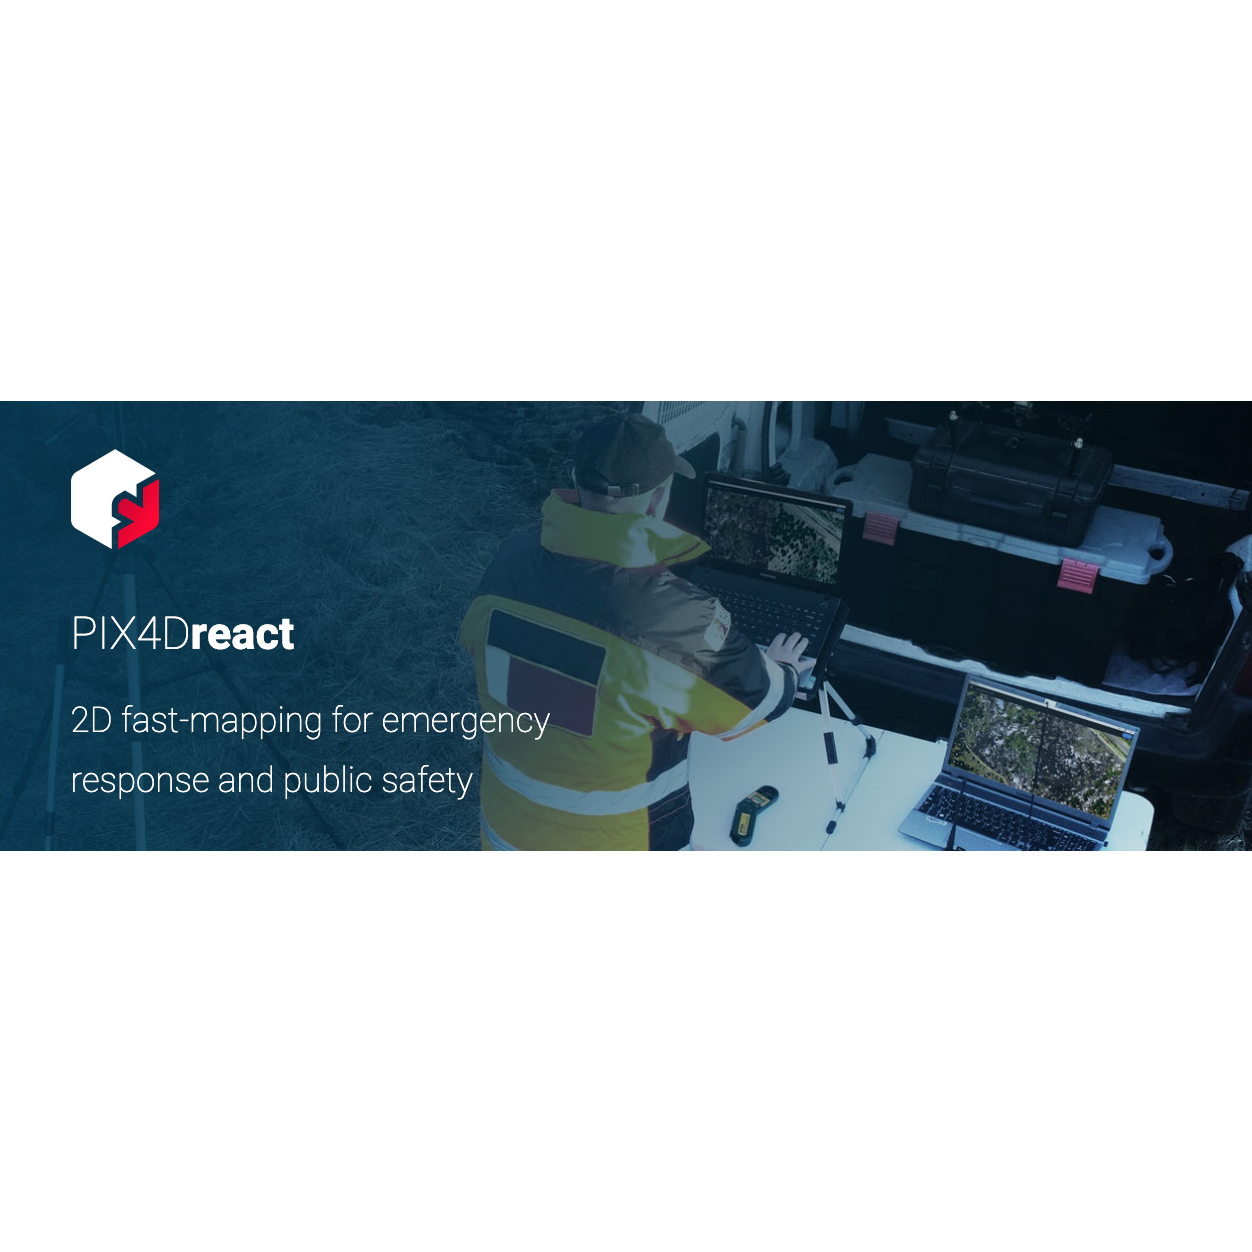 PIX4Dreact mapping for emergency response and public safety